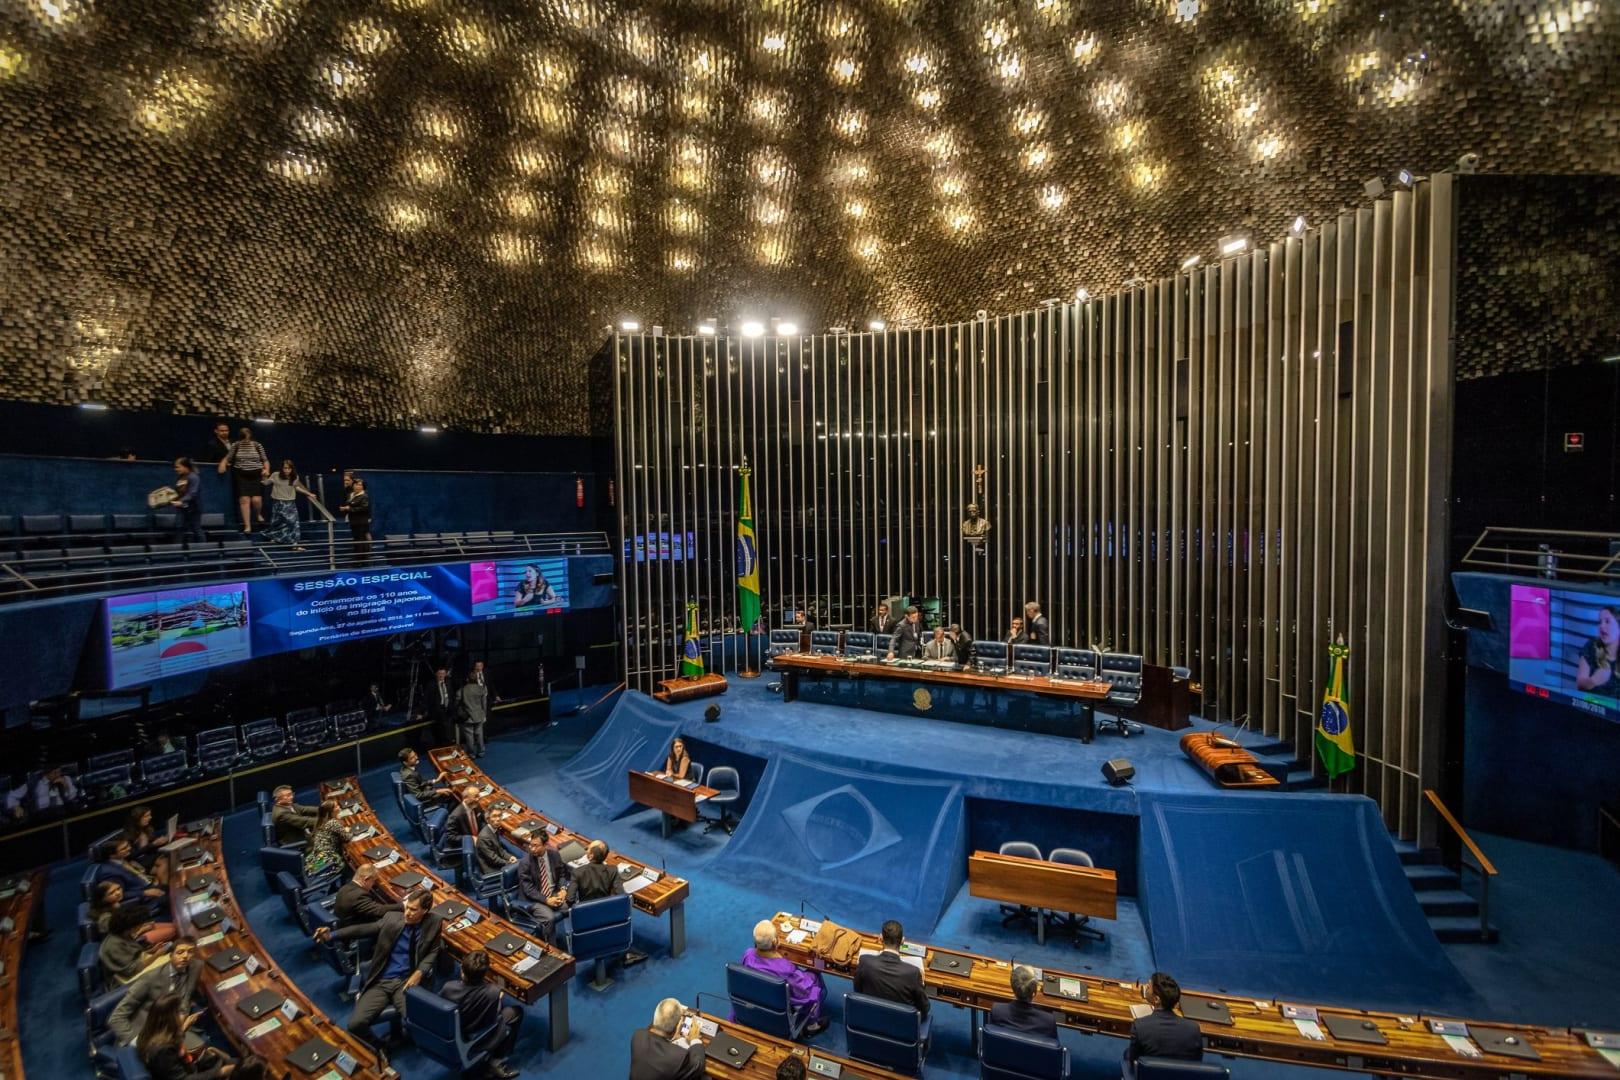 New Brazil government uses protest to justify harsh new legislation